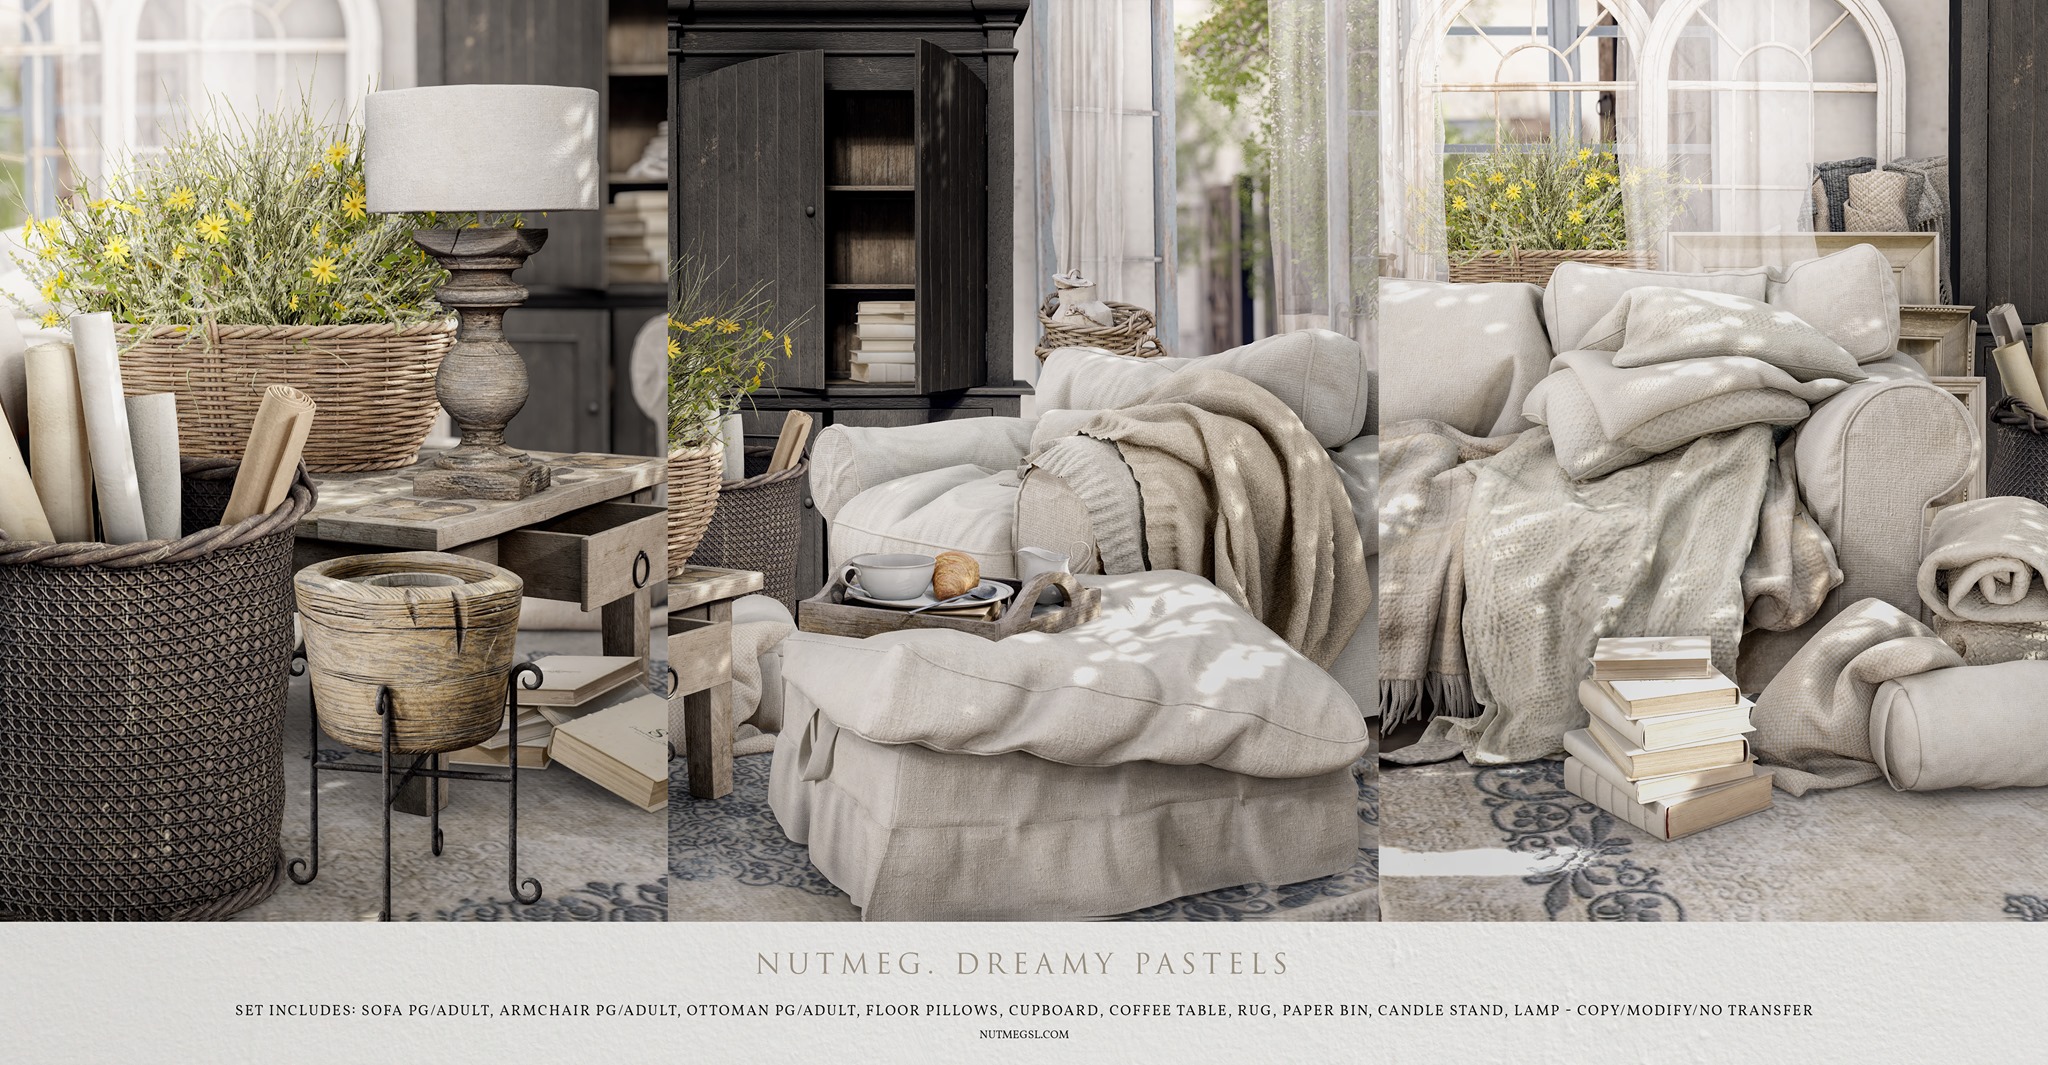 Nutmeg – Dreamy Pastels Seating Collection